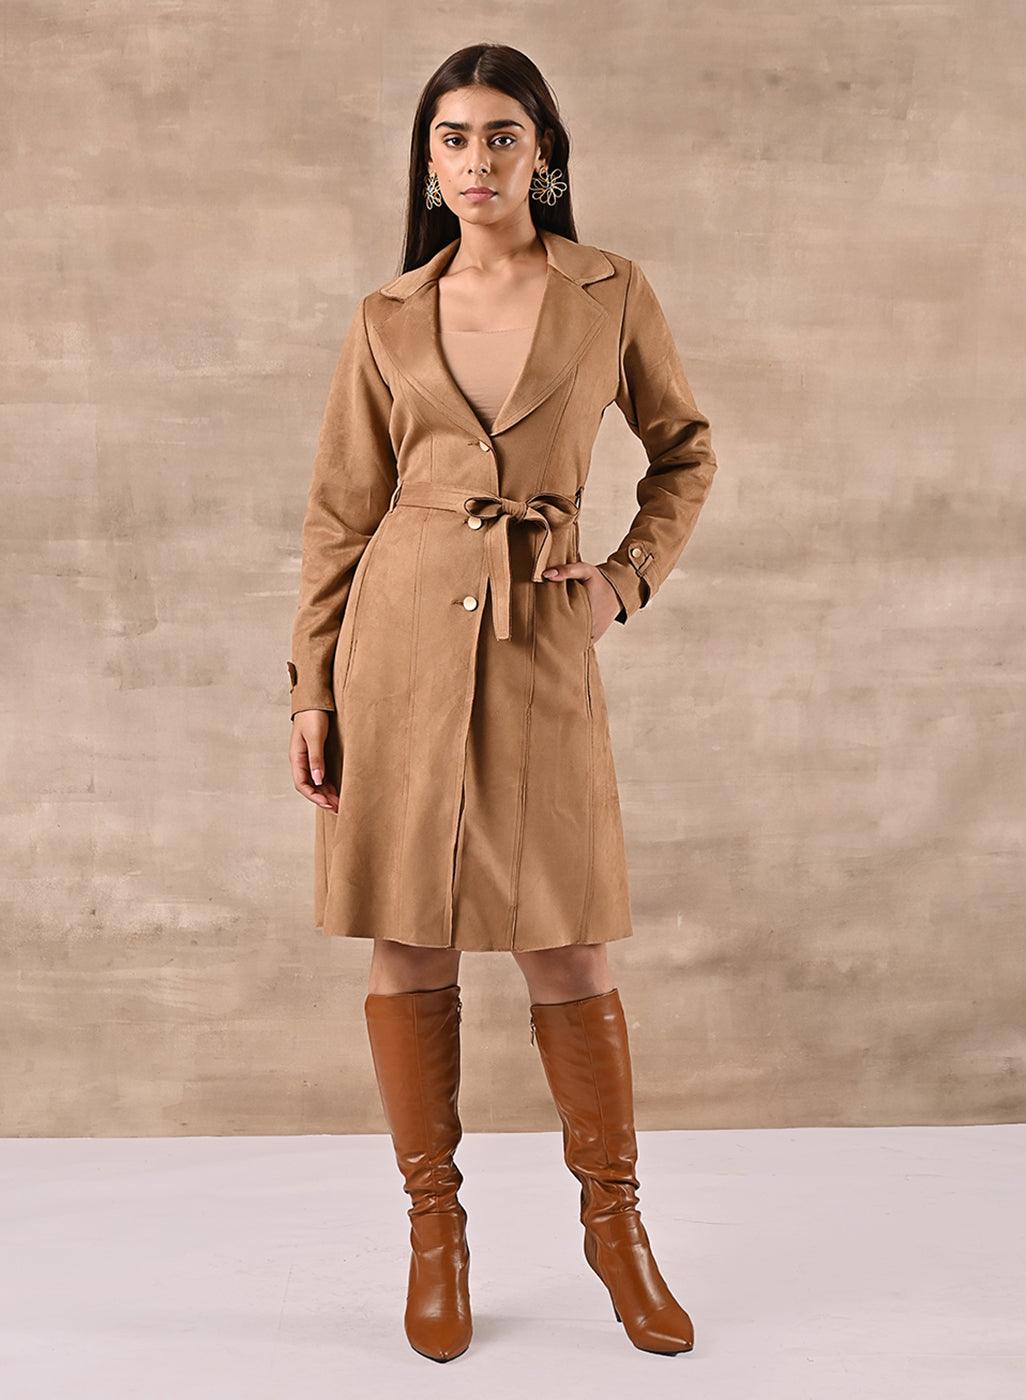 Gold Long Over Coat with Notch collar and Slant Pockets - Lakshita